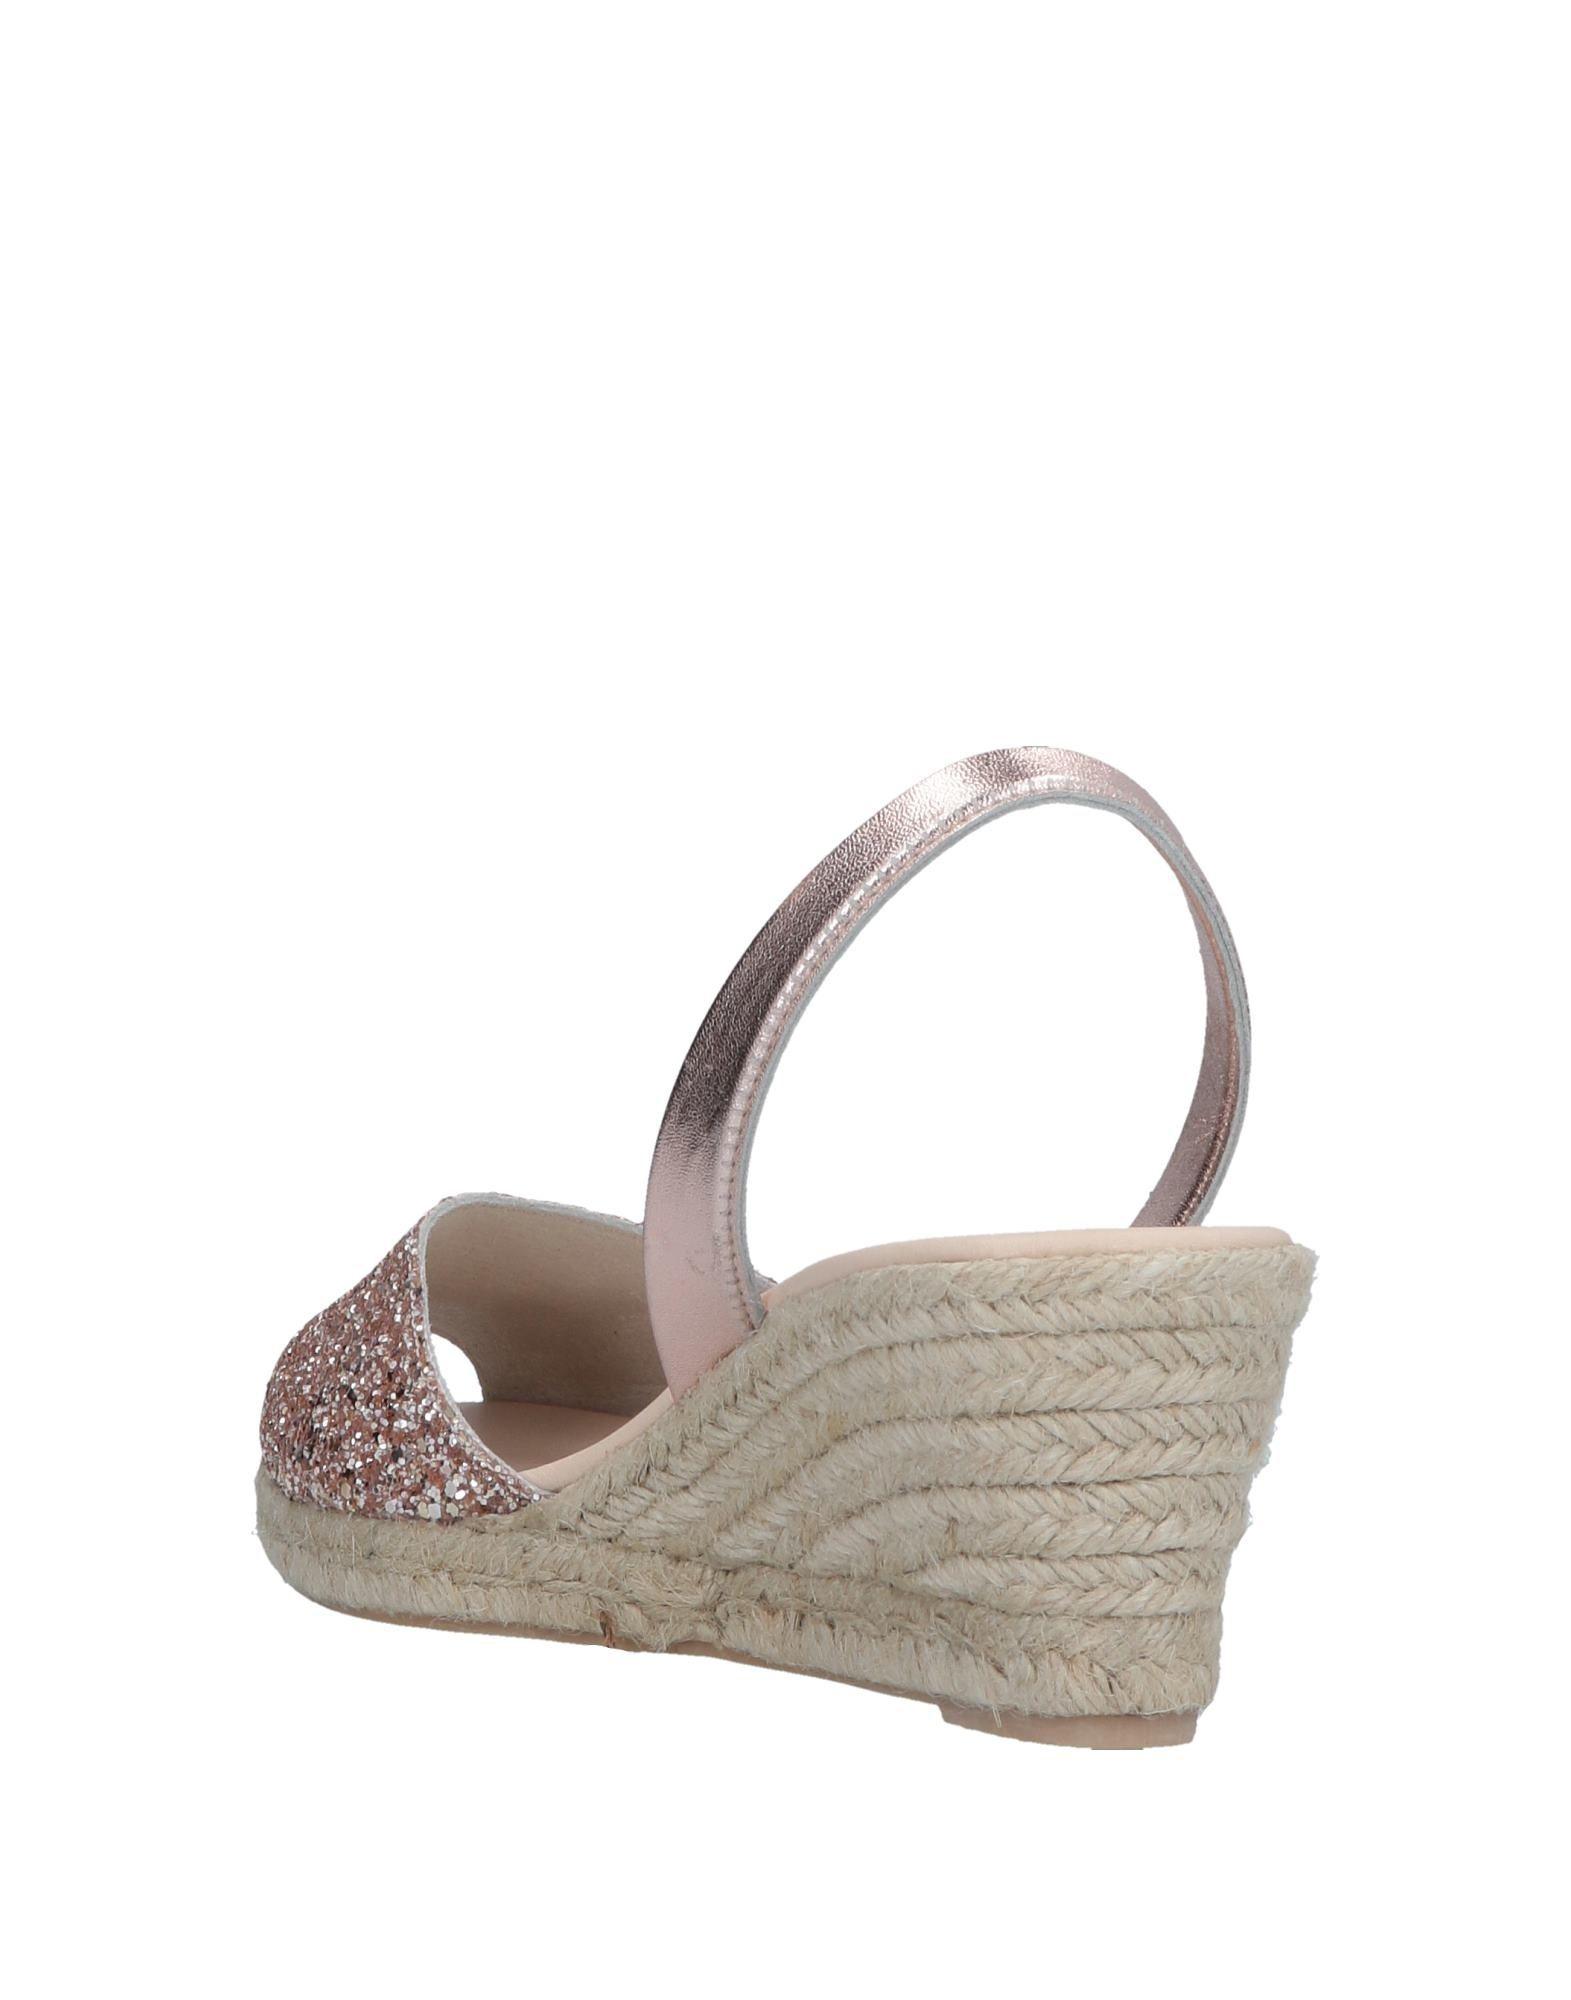 Ria Menorca Leather Espadrilles in Light Pink (Pink) - Lyst